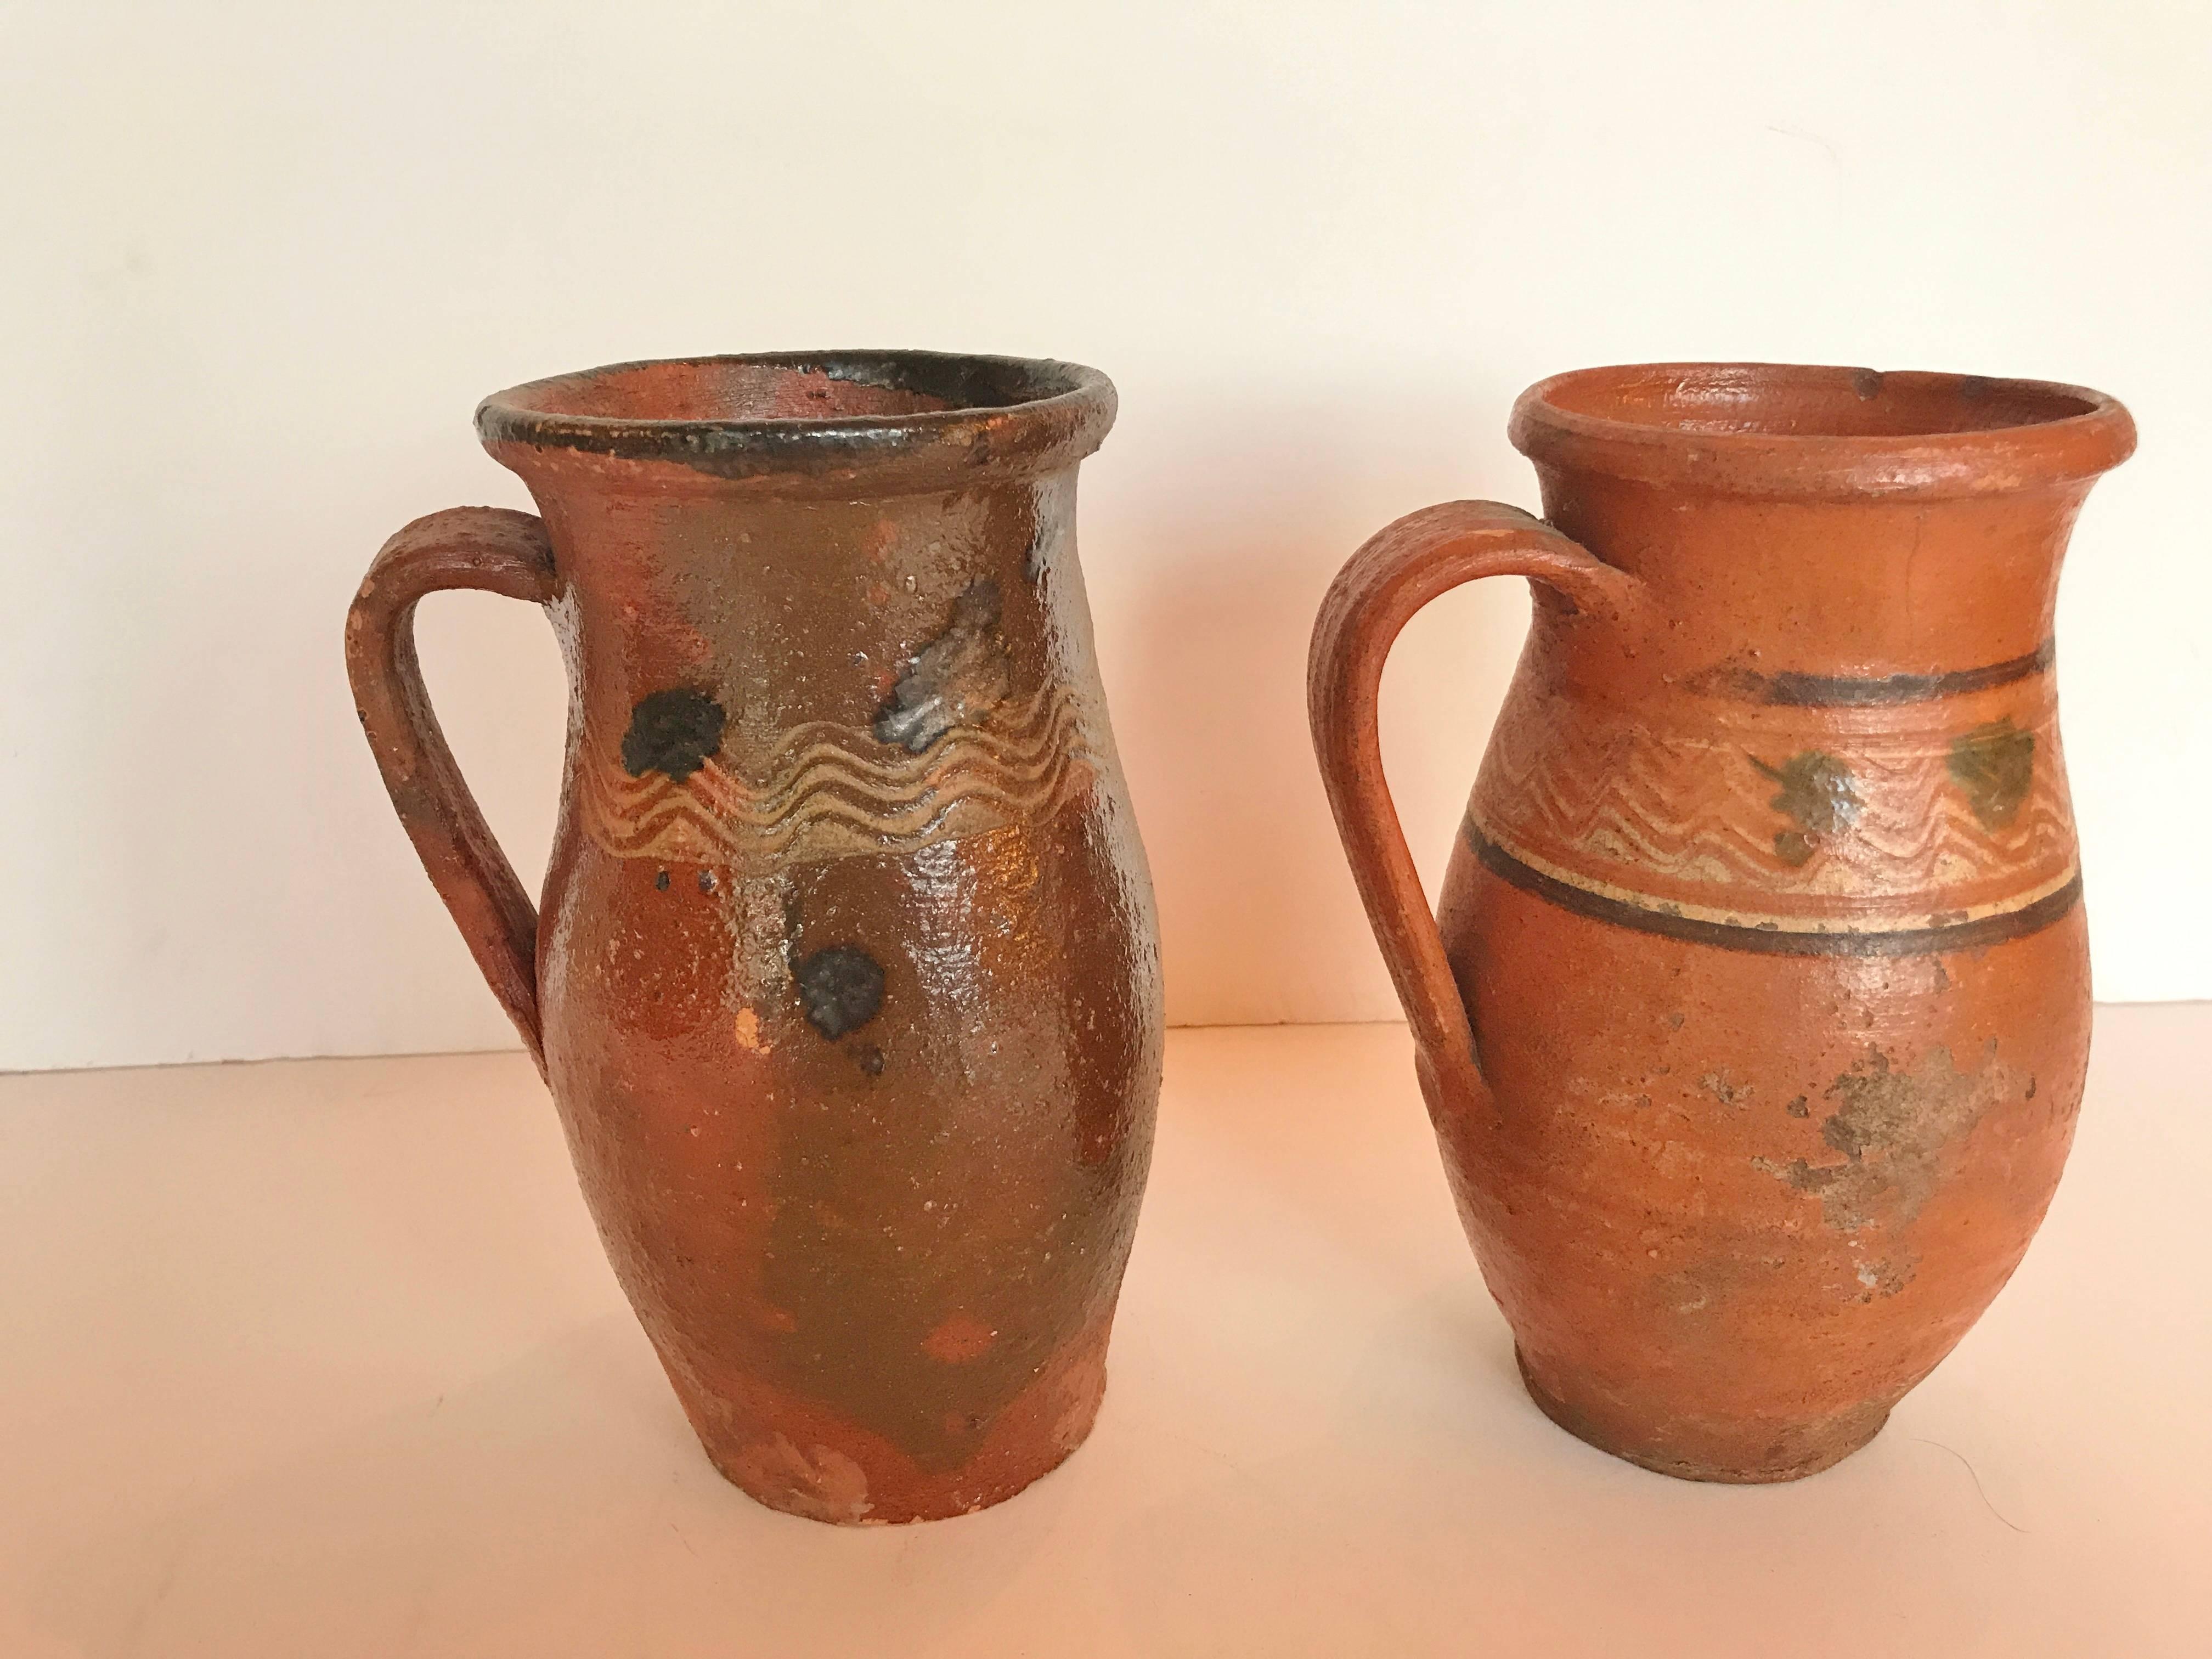 Vintage Transylvania red ware pottery pitchers,  splatter painted glaze.  Romanian terra-cotta, Folk Art.  Early to mid 1900's.  Measurments: One pitcher is 8.25